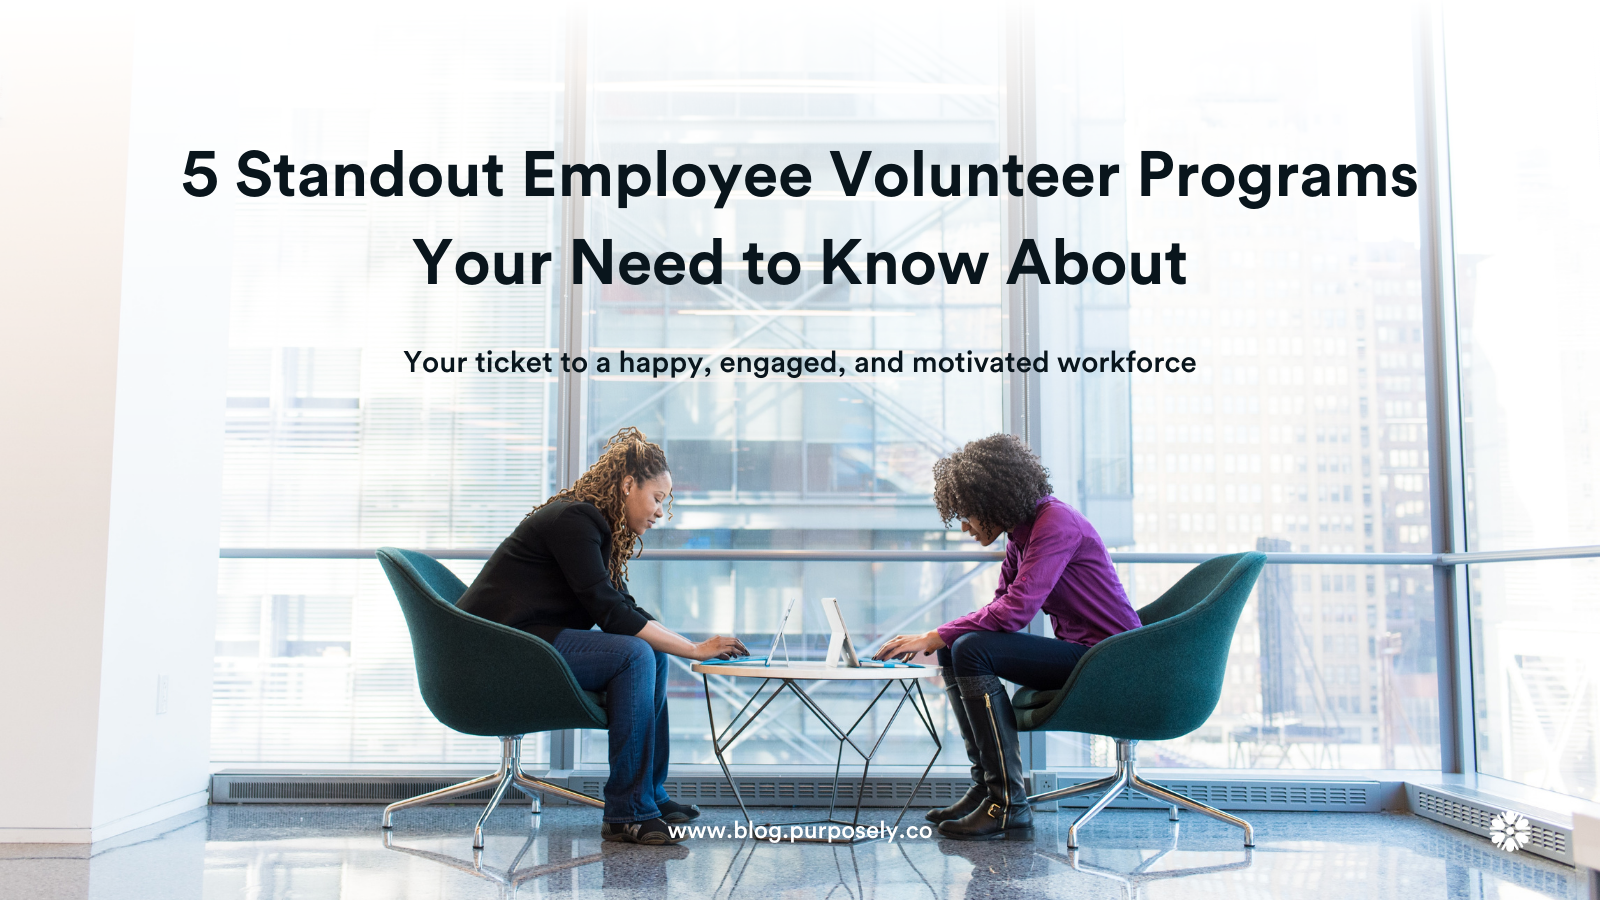 5 Standout Employee Volunteer Programs You Need to Know About